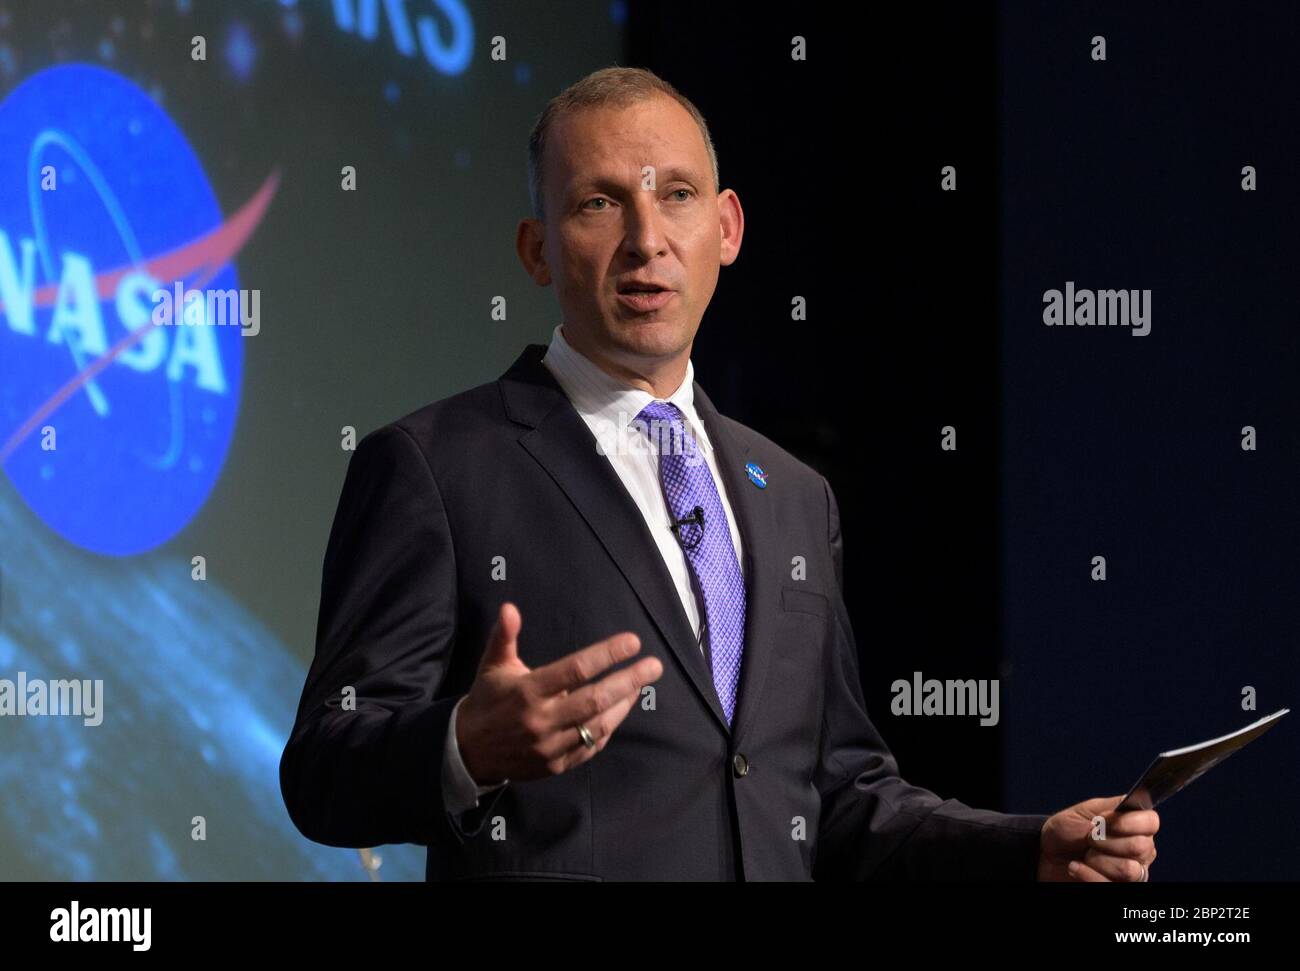 Commercial Lunar Payload Services (CLPS)  NASA Associate Administrator for the Science Mission Directorate, Thomas Zurbuchen, answers questions during an event where nine U.S. companies where named as eligible to bid on NASA delivery services to the lunar surface through Commercial Lunar Payload Services (CLPS) contracts, Thursday, Nov. 29, 2018 at NASA Headquarters in Washington. The companies will be able to bid on delivering science and technology payloads for NASA, including payload integration and operations, launching from Earth and landing on the surface of the Moon. NASA expects to be Stock Photo